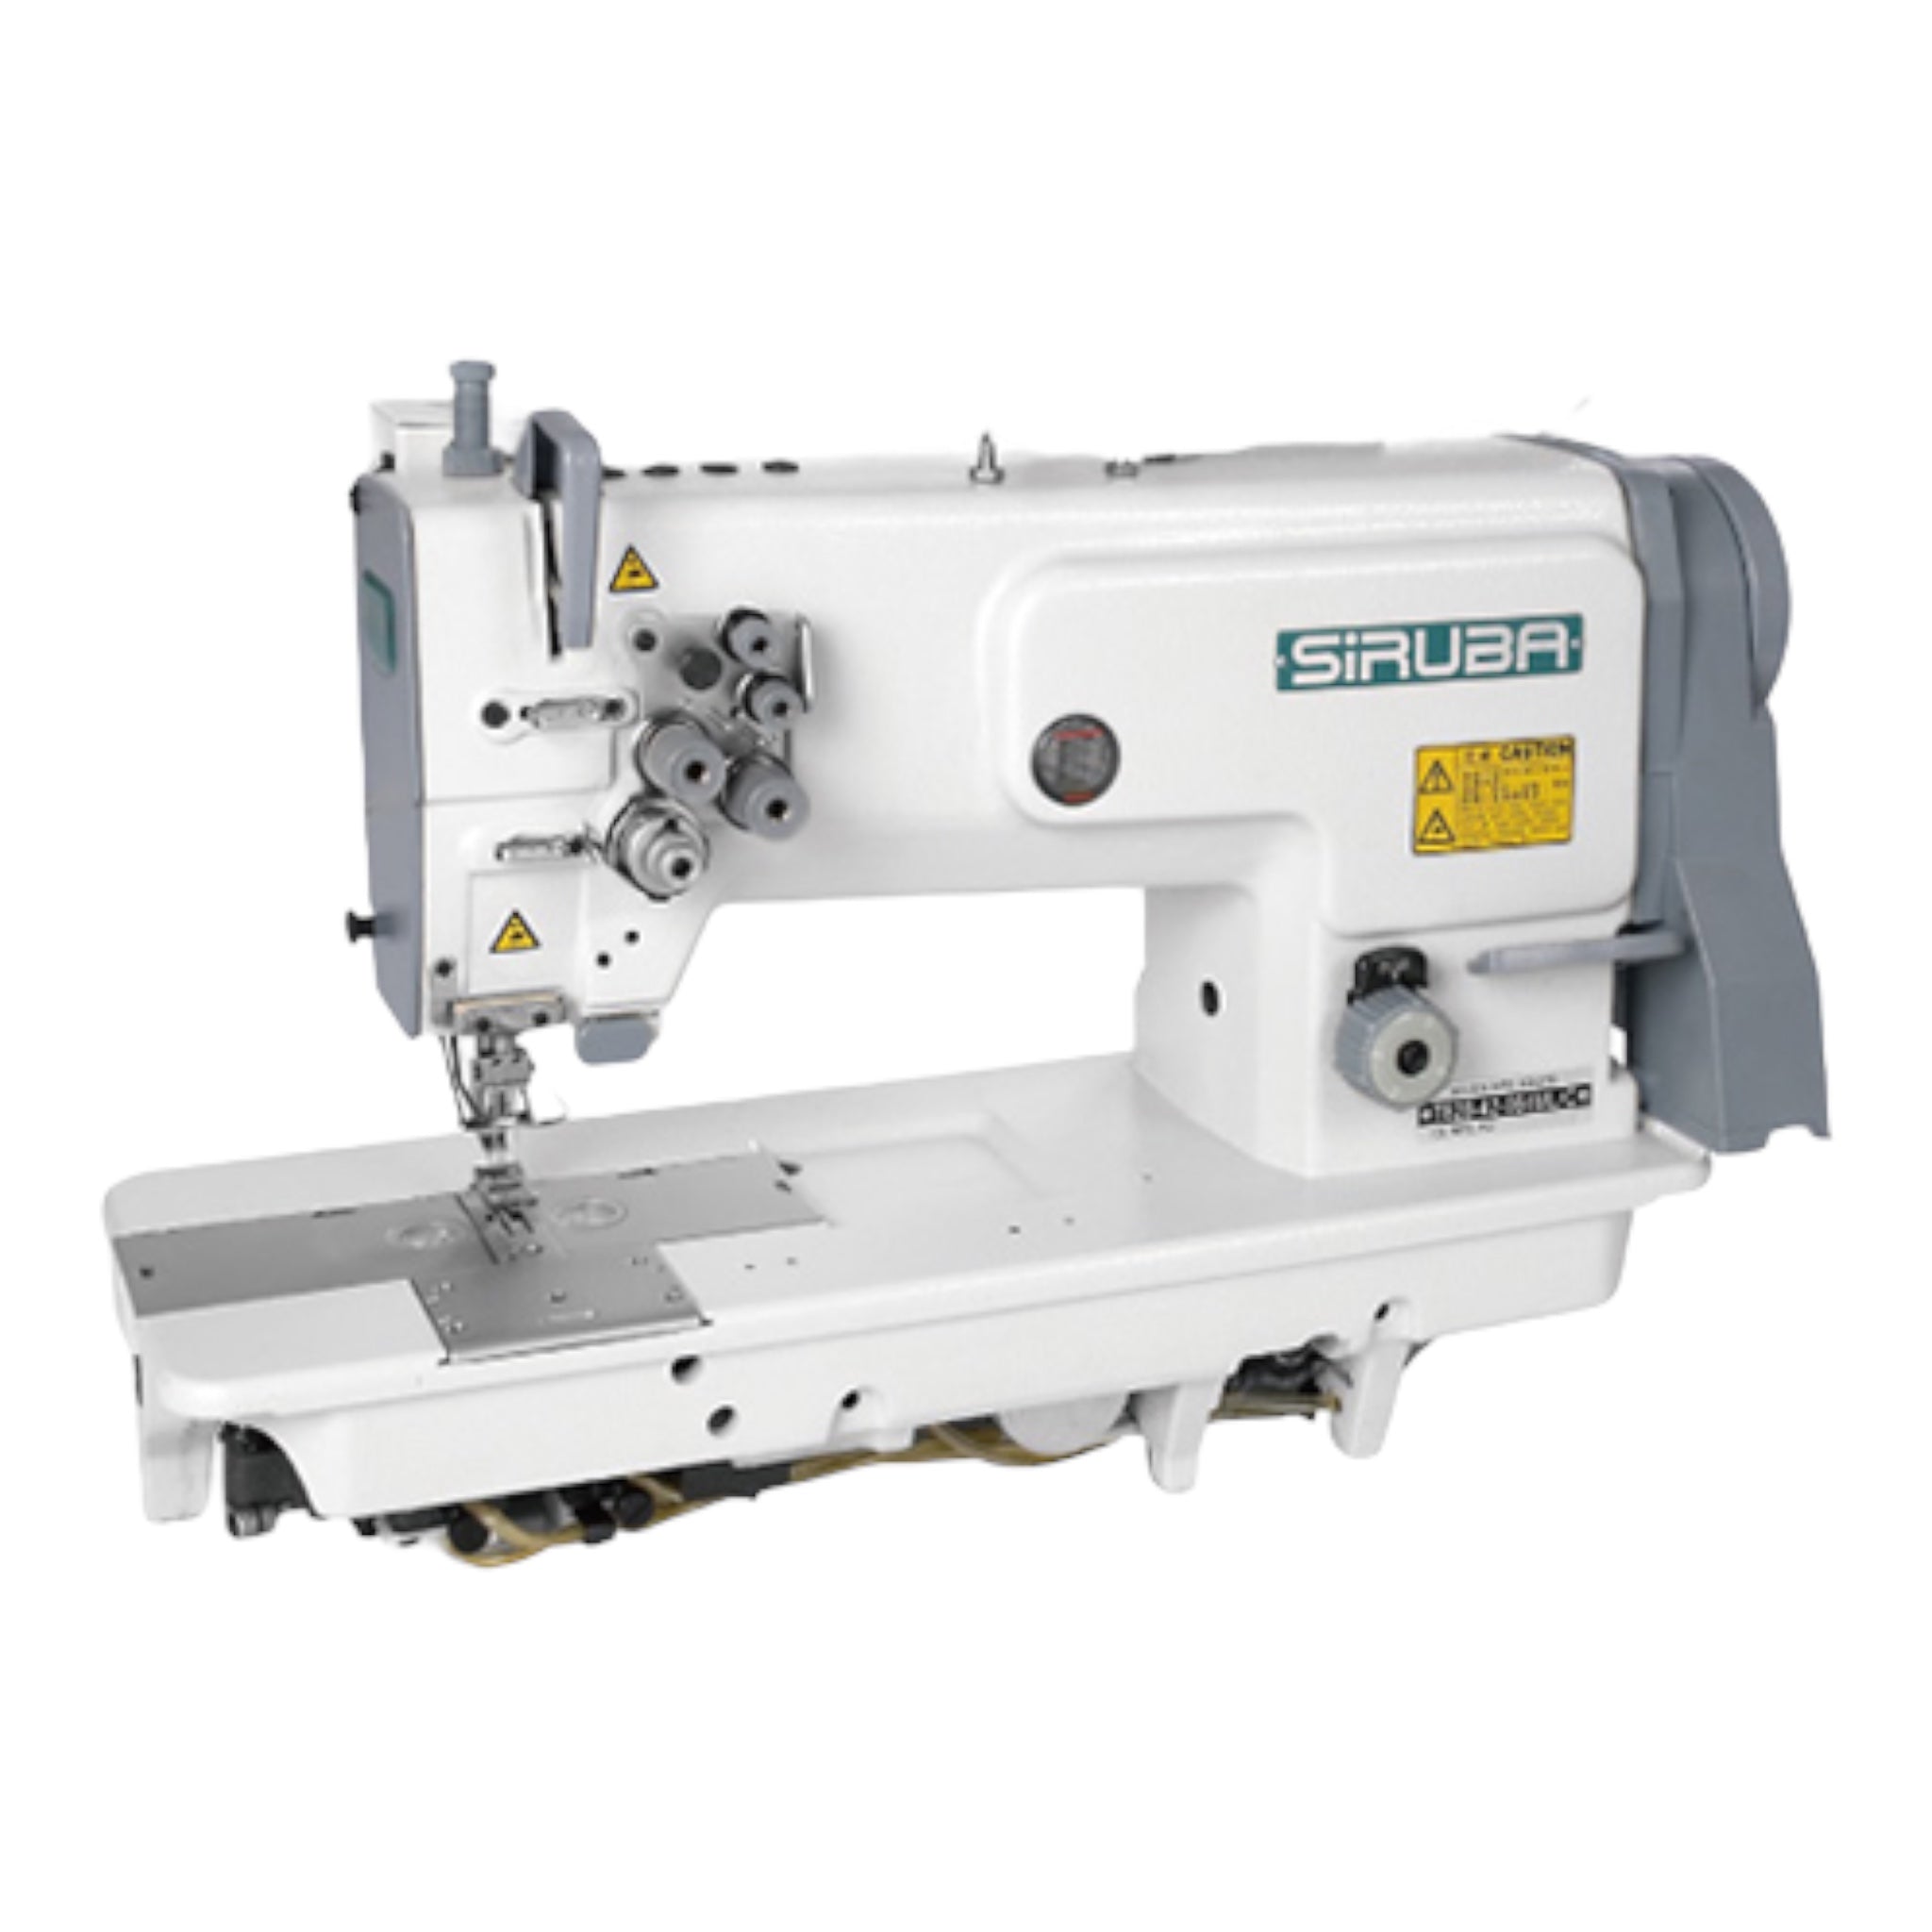 SIRUBA T828-42-064L Double Needle, Needle Feed Lockstitch Industrial Sewing Machine Assembled with Table and Servo Motor Included